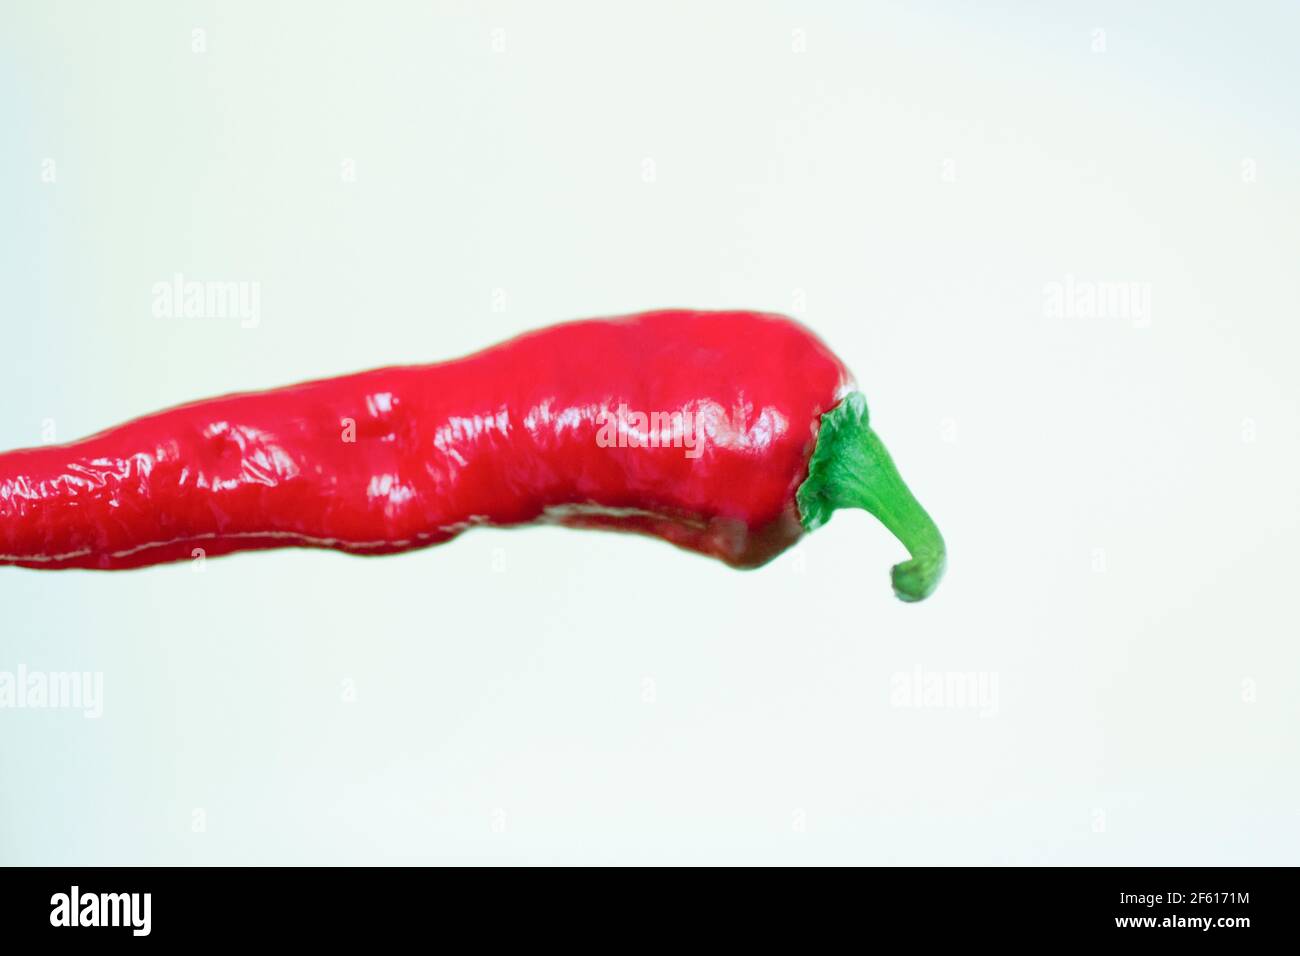 Long Red hot chili pepper facing right in a horizontal image with studio lighing Stock Photo